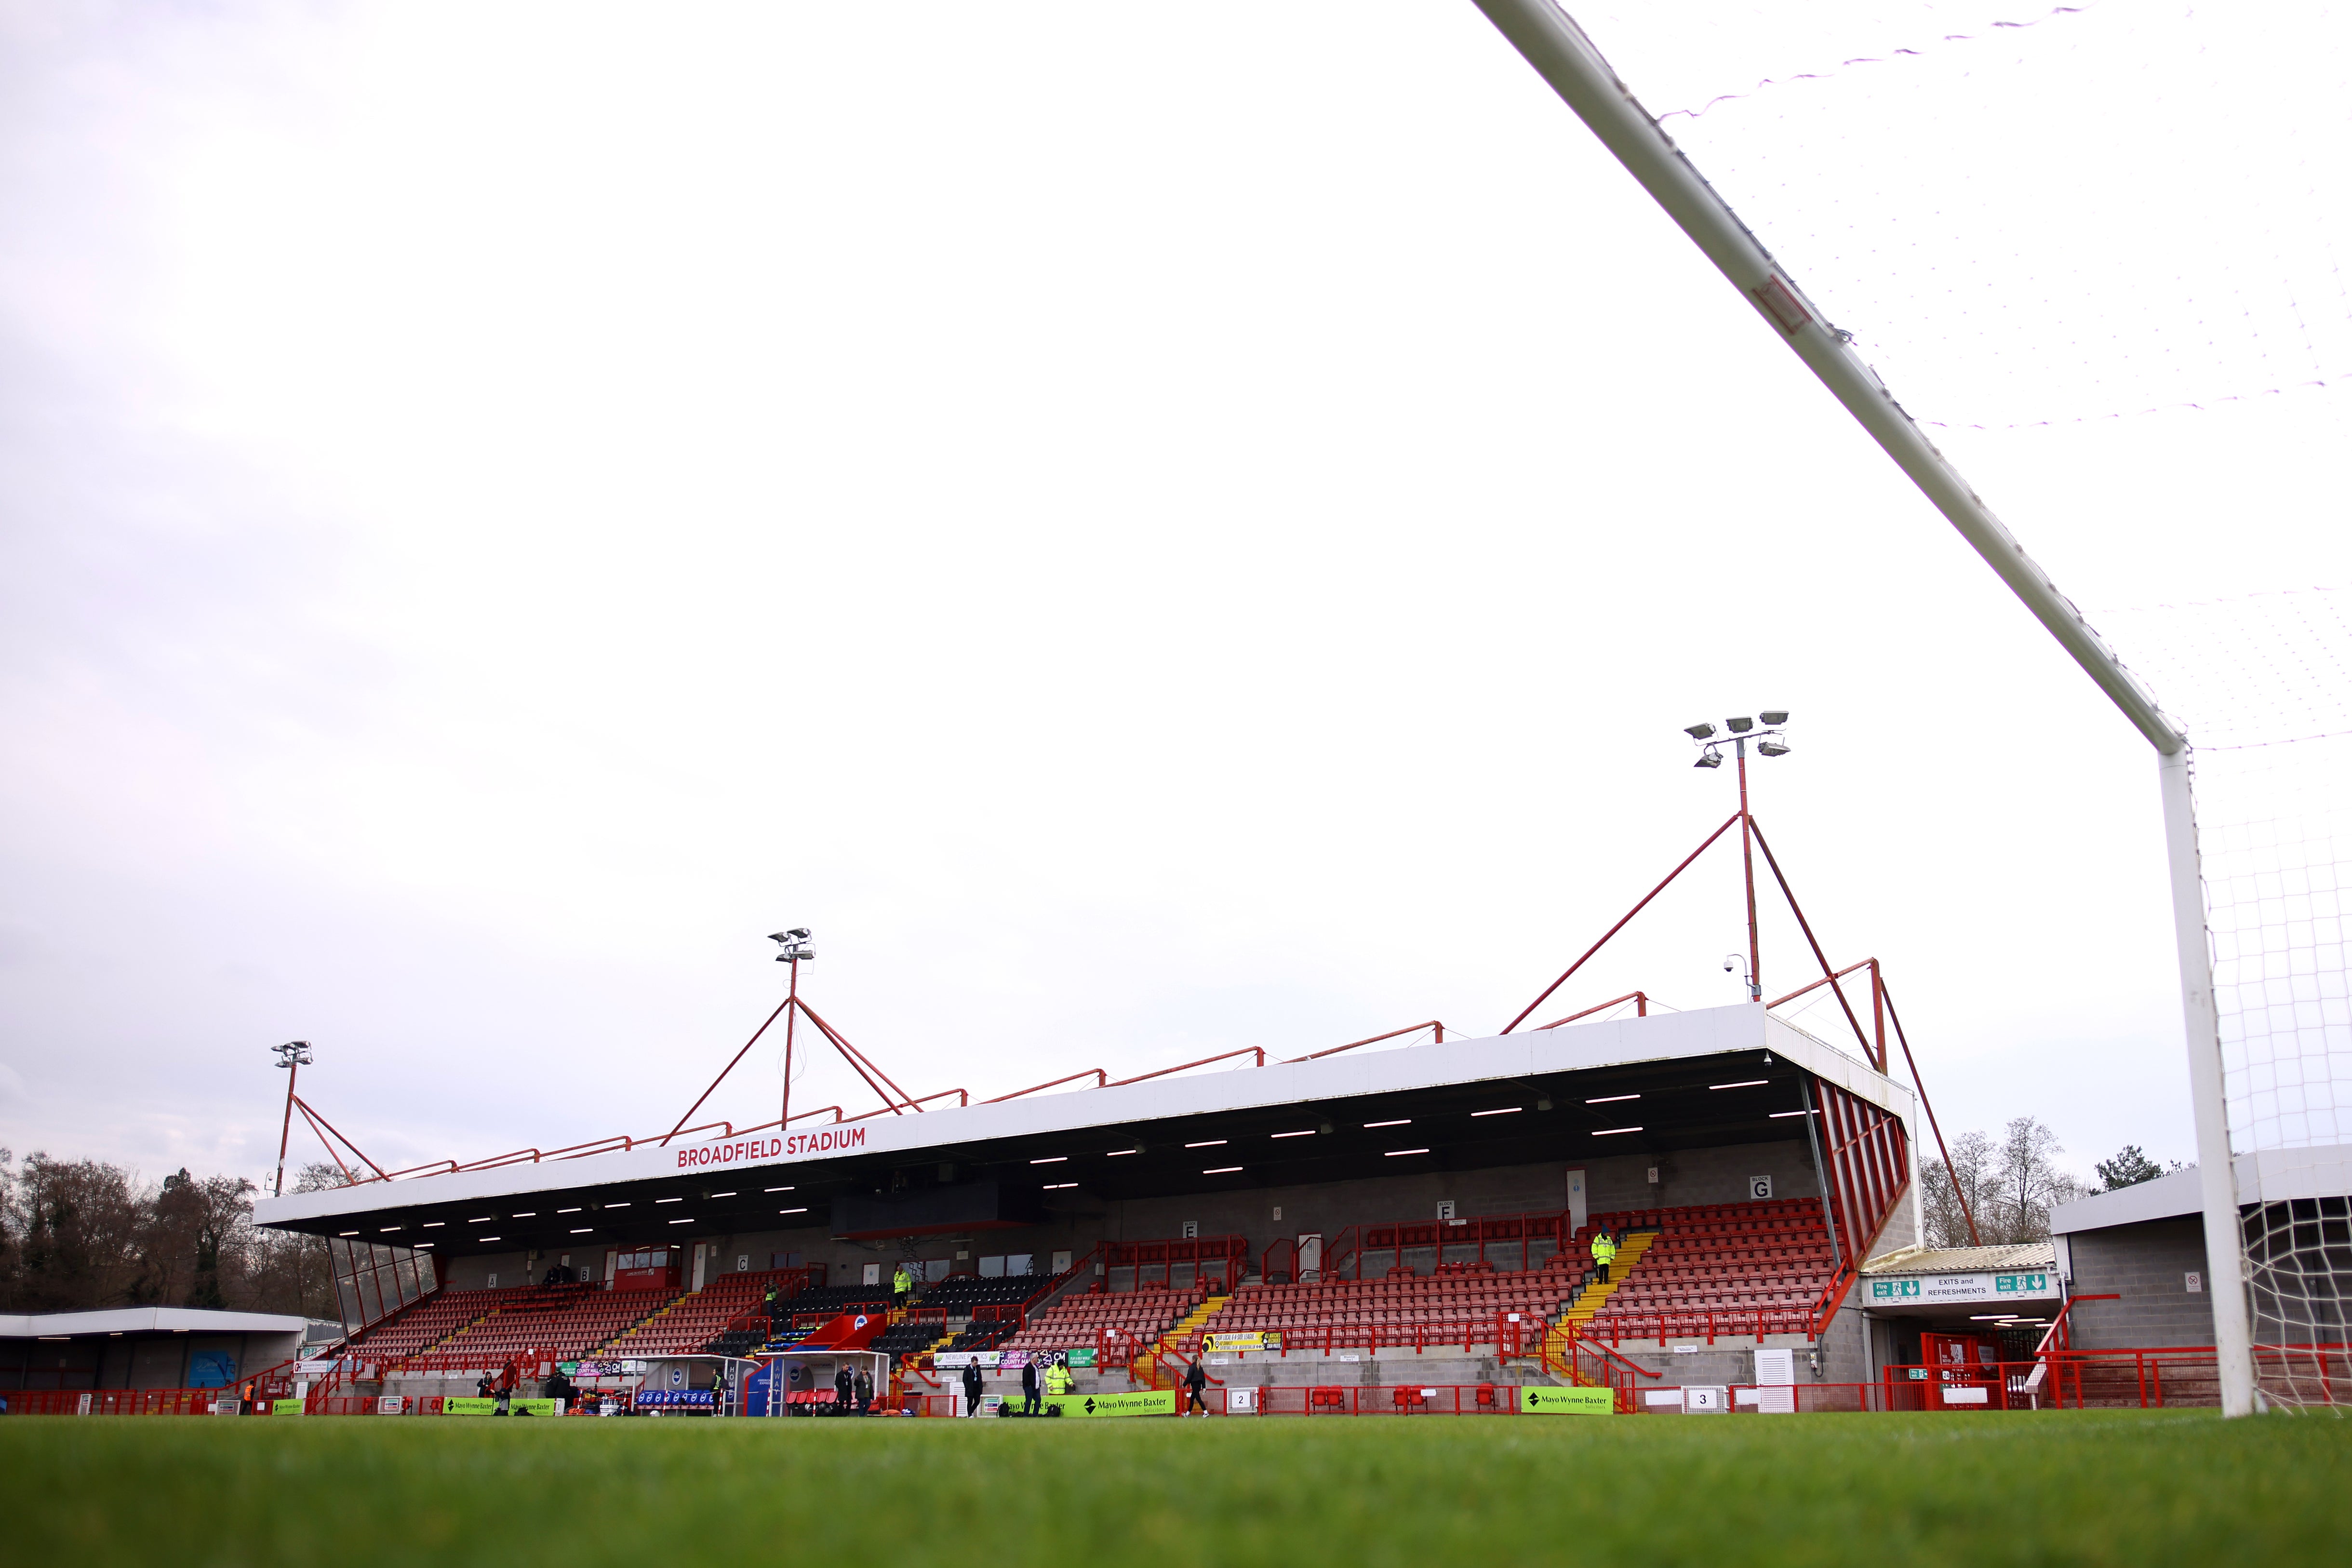 The Broadfield Stadium pitch was not deemed safe to play on